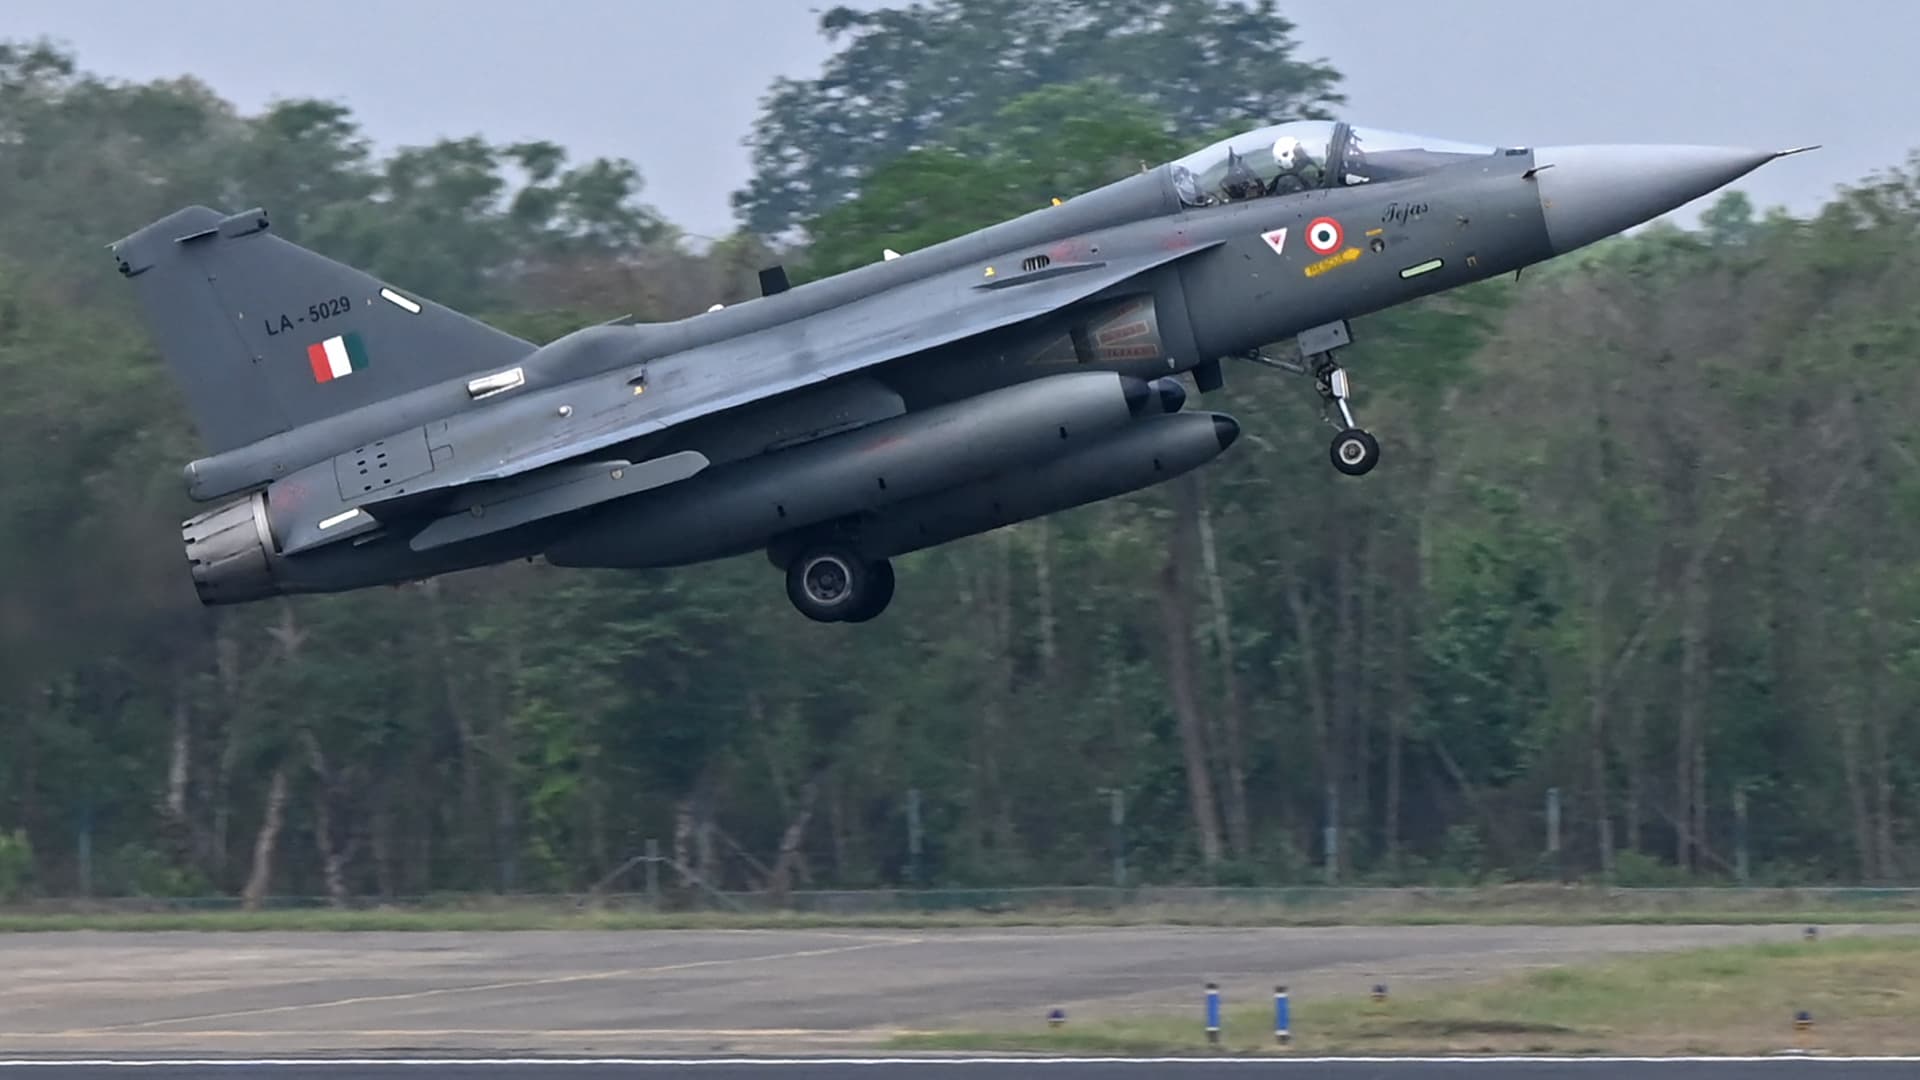 GE nears deal with India's Hindustan Aeronautics to co-manufacture fighter jet engines